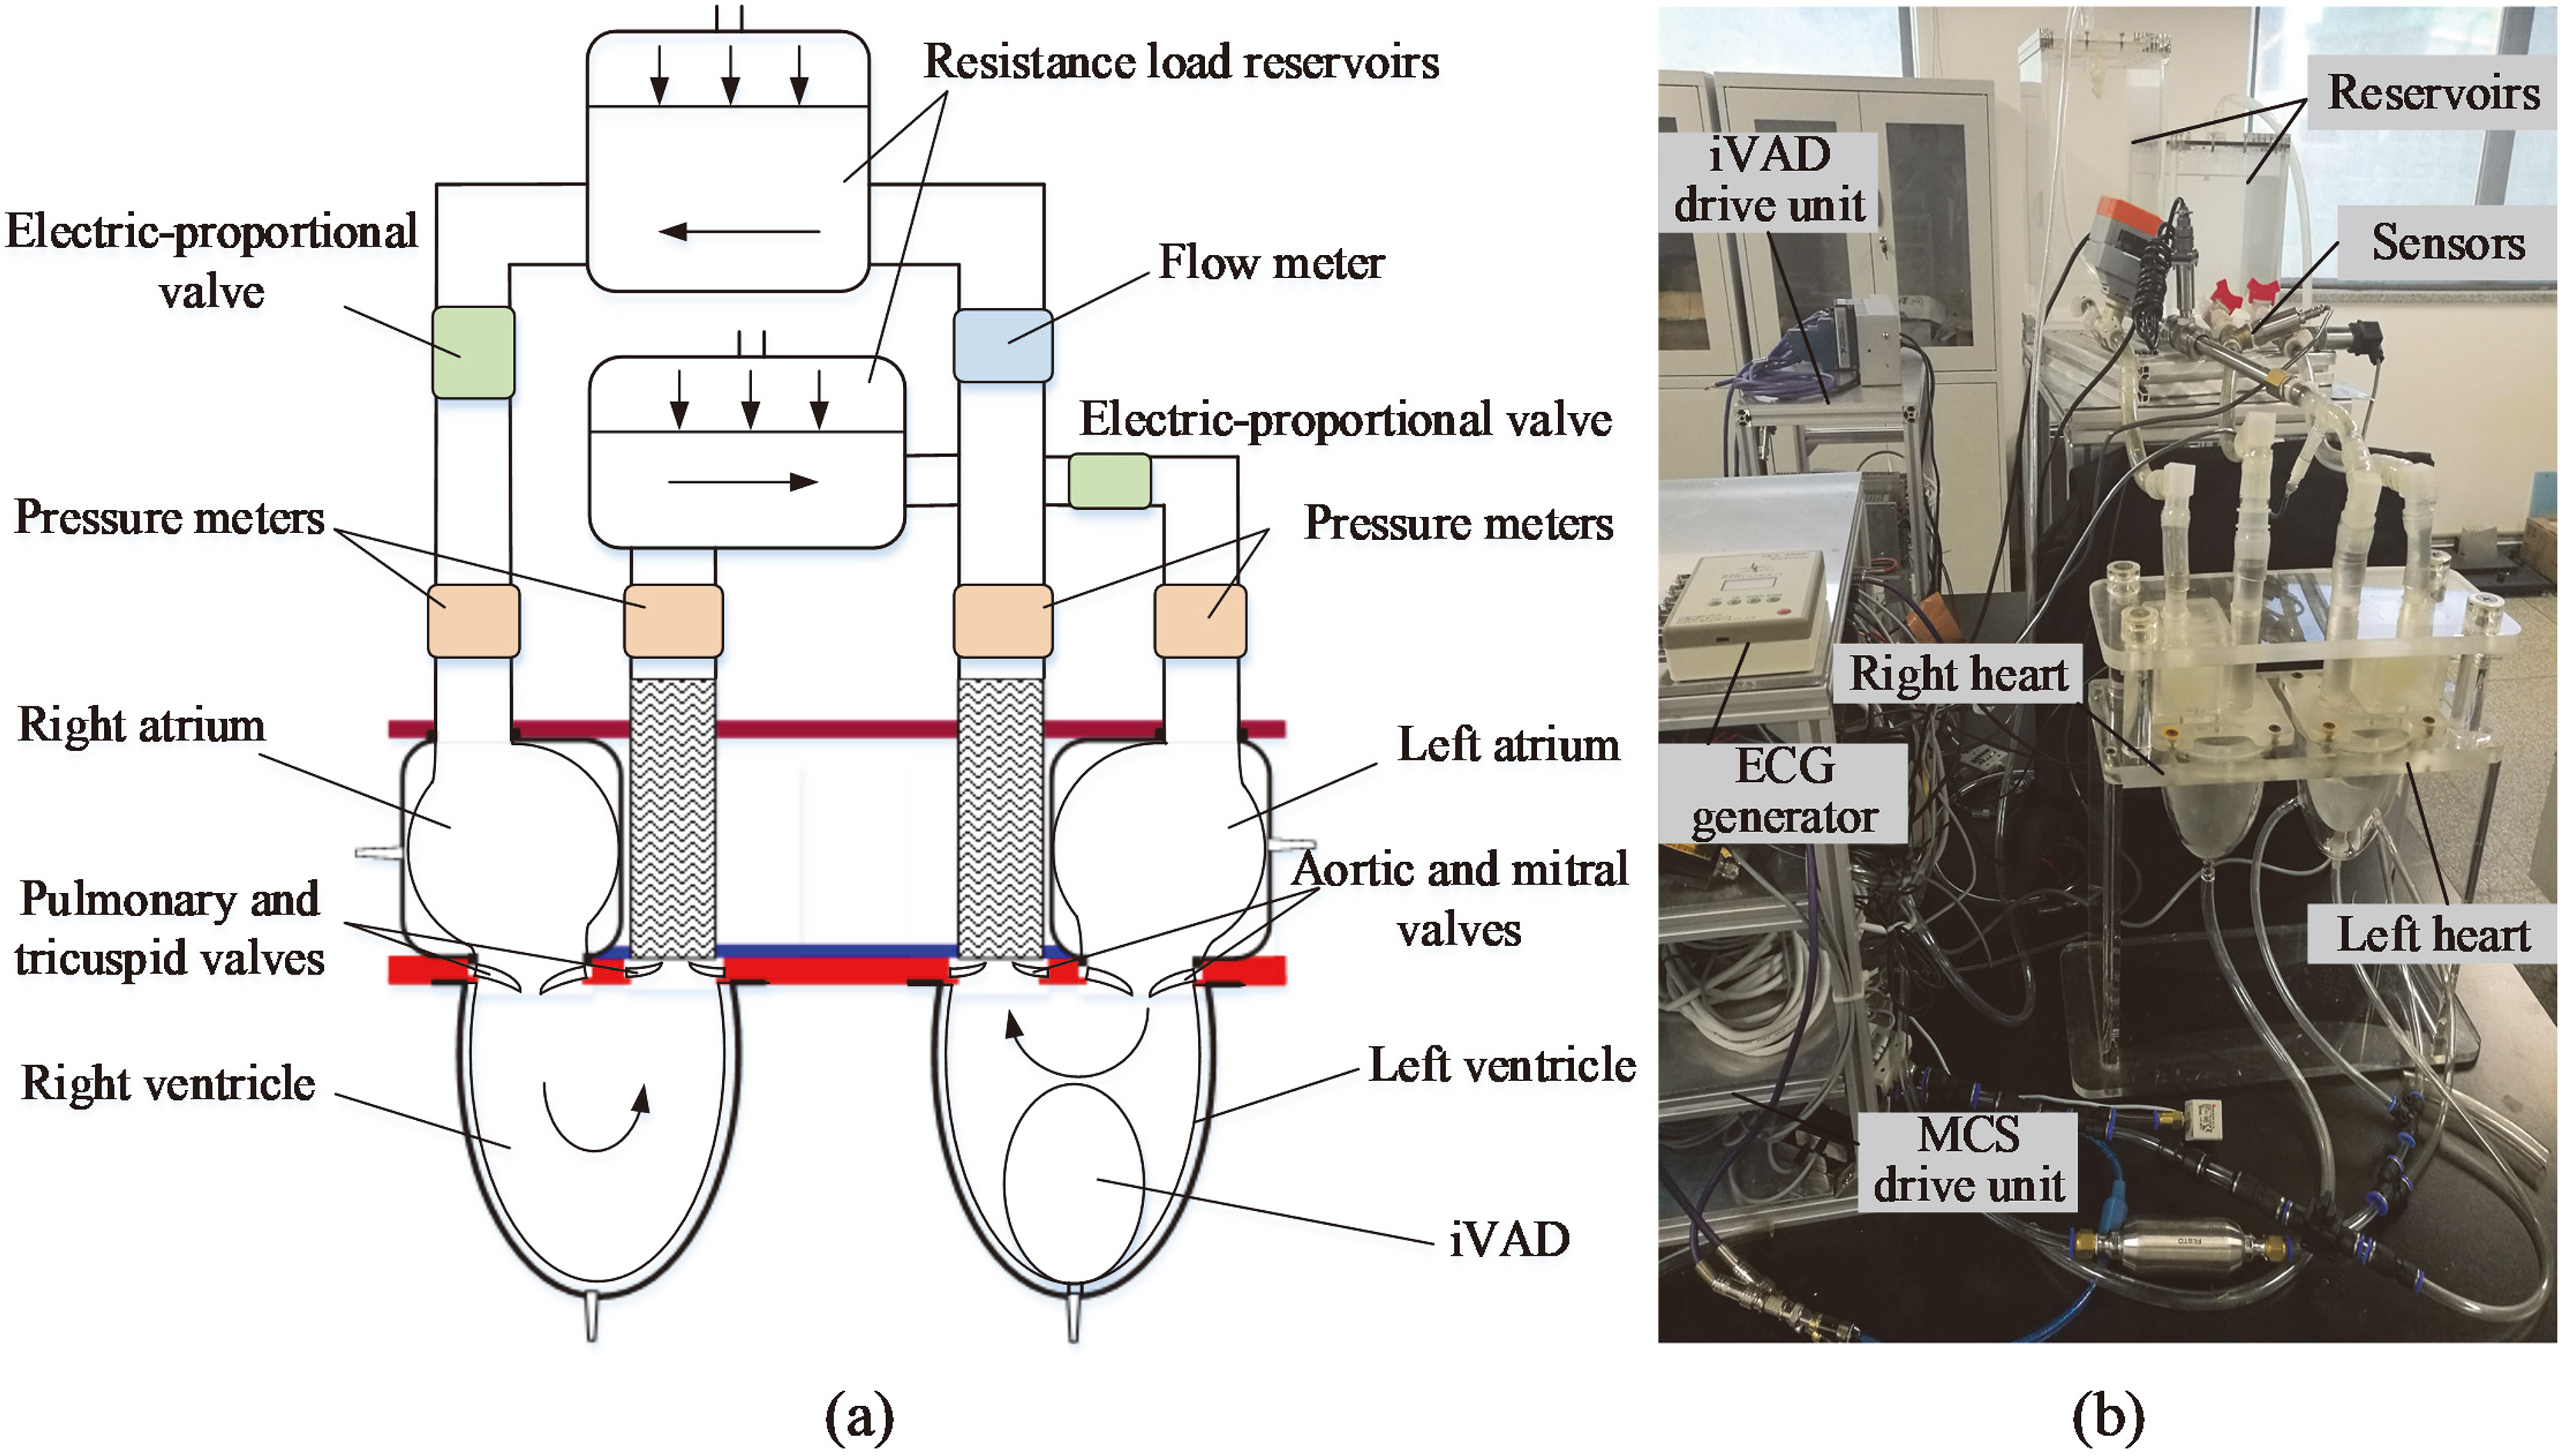 (a) Schematic of an experimental mock cardiovascular system, (b) Picture of the experimental setup.